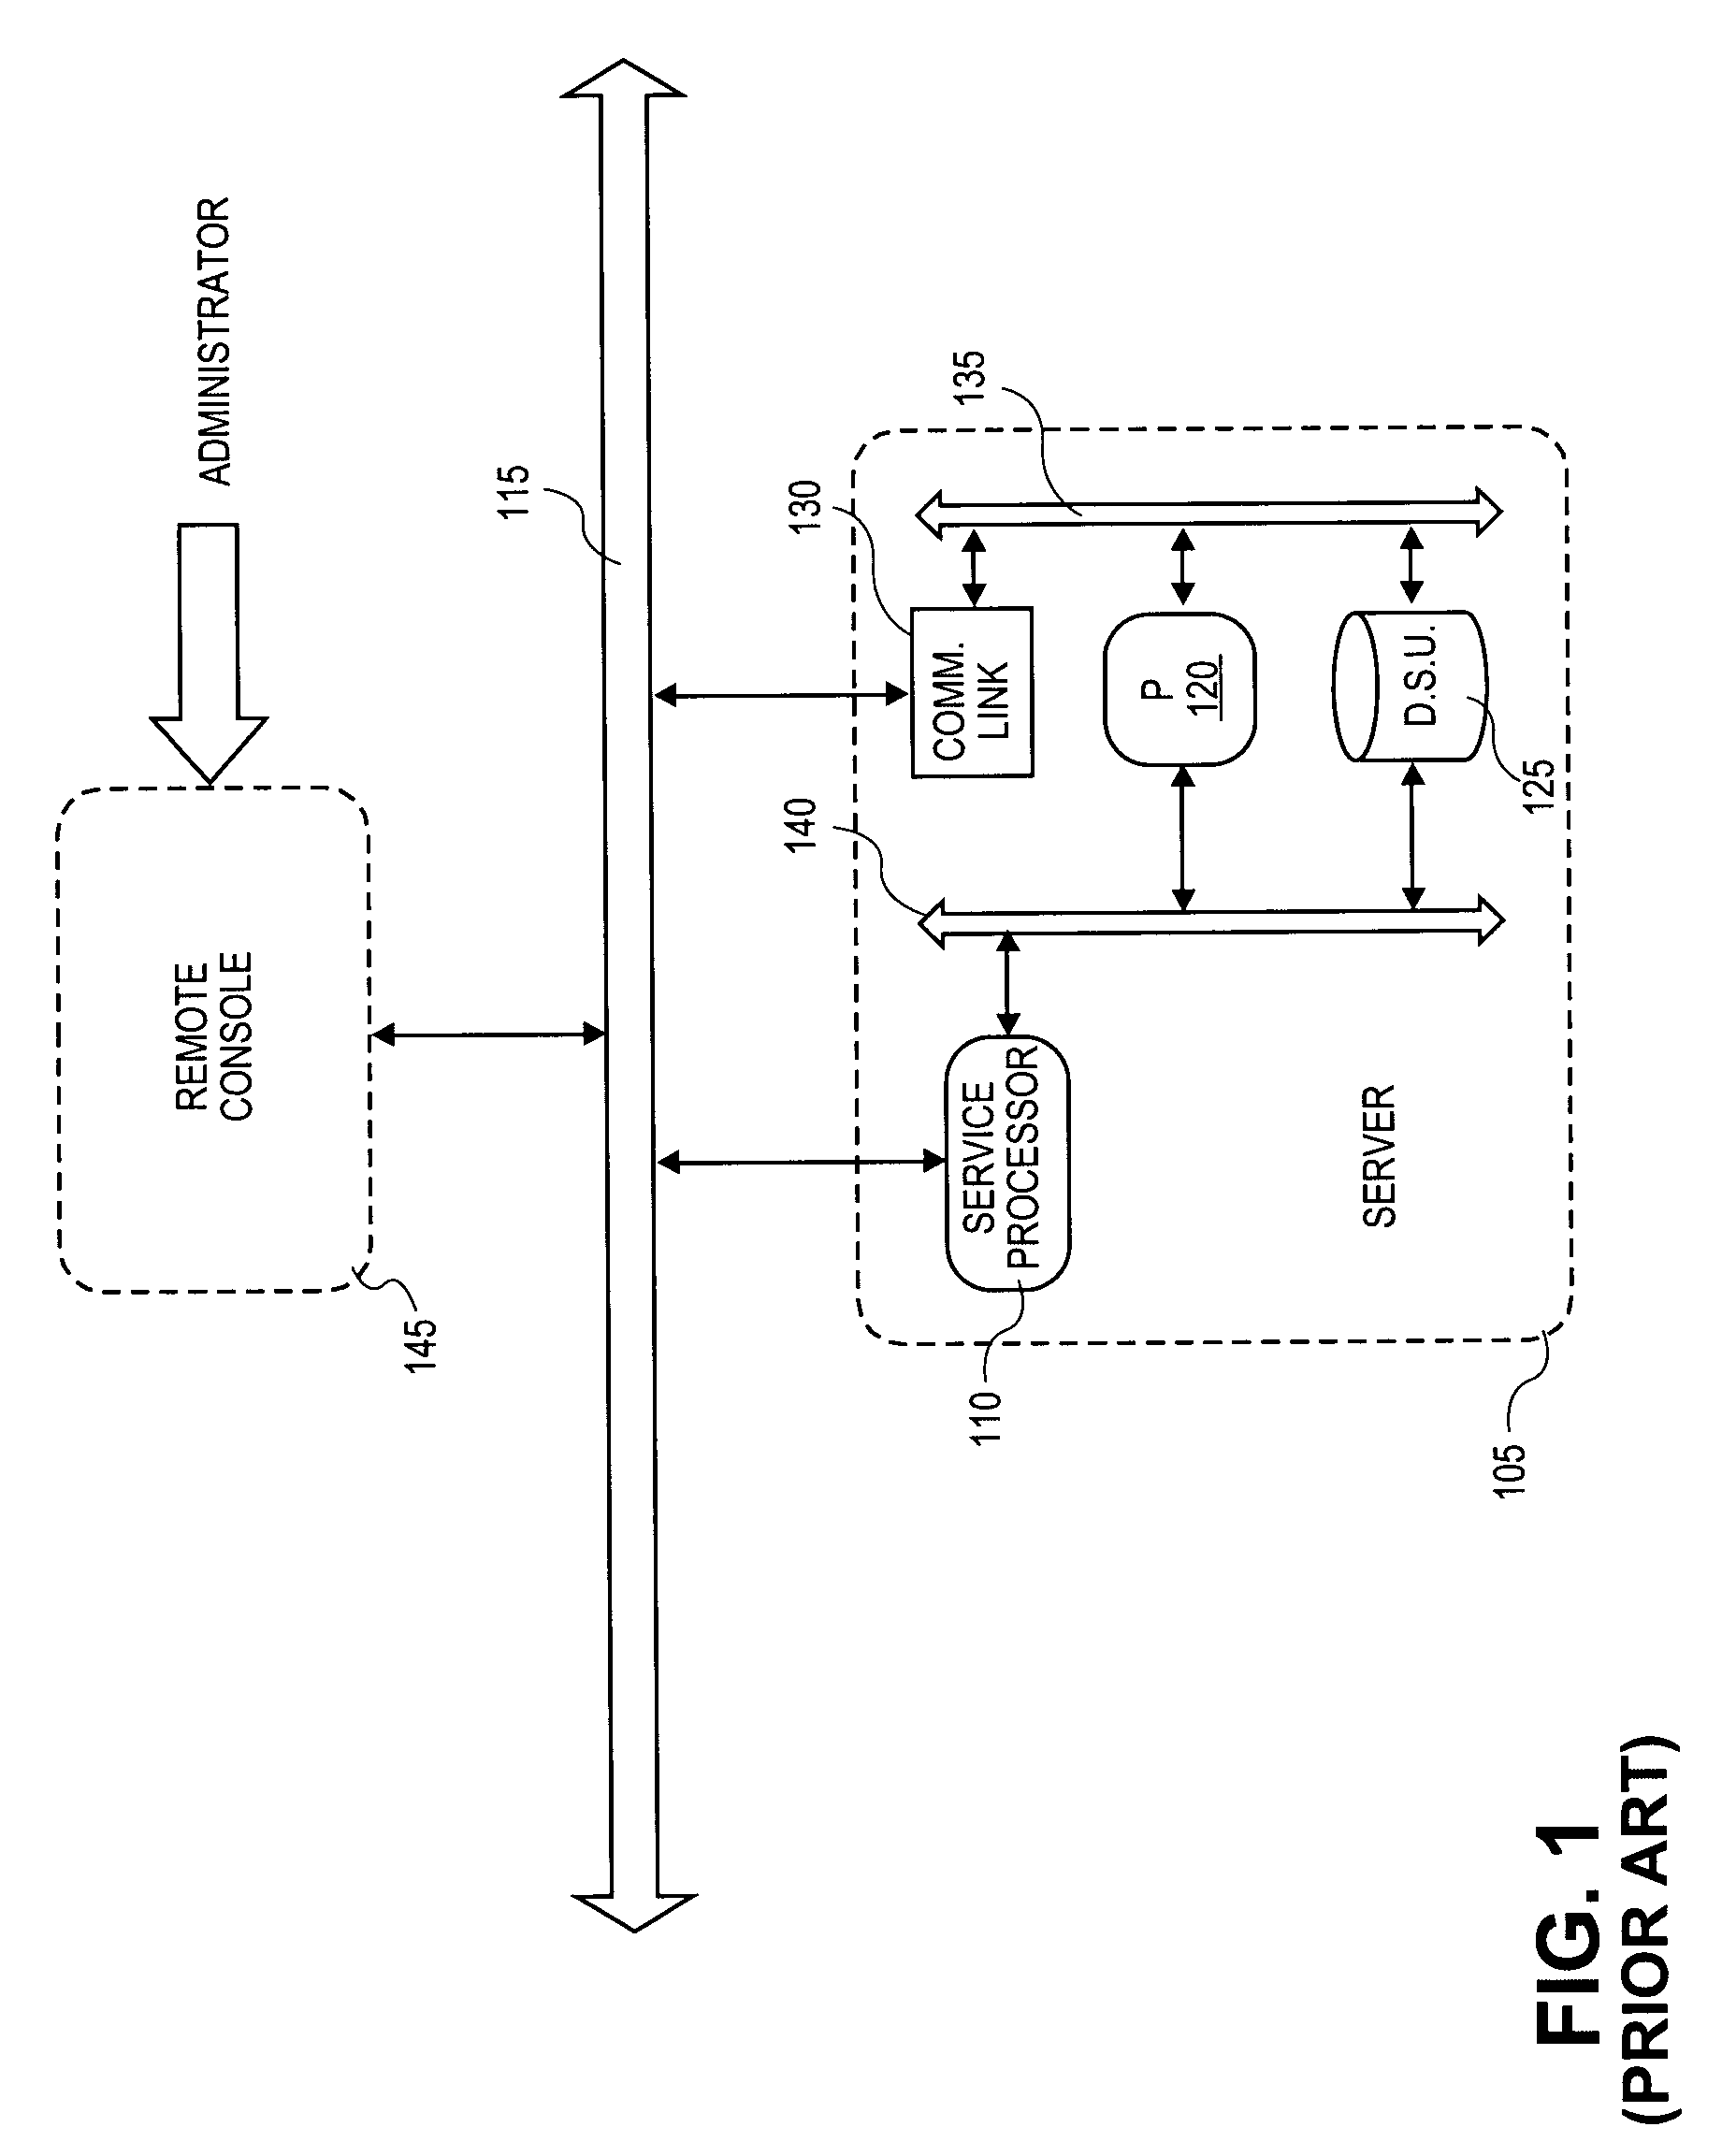 Method of activating management mode through a network for monitoring a hardware entity and transmitting the monitored information through the network